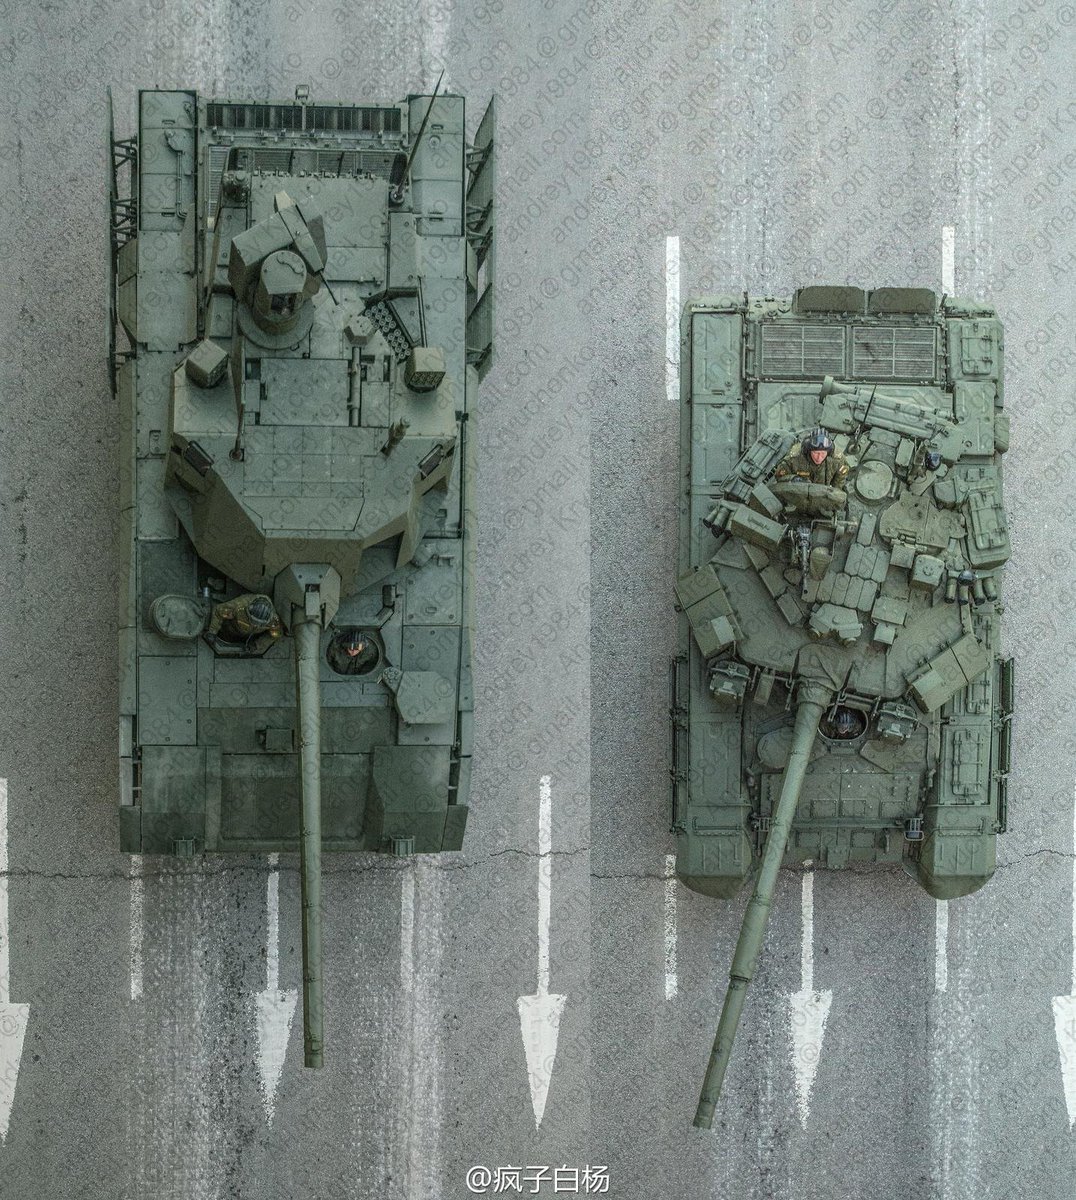 Here a good demonstration of the size differential between T-14 and T-90. Also see old image of T-90M, showing the radically different turret design from precursor T-90A.